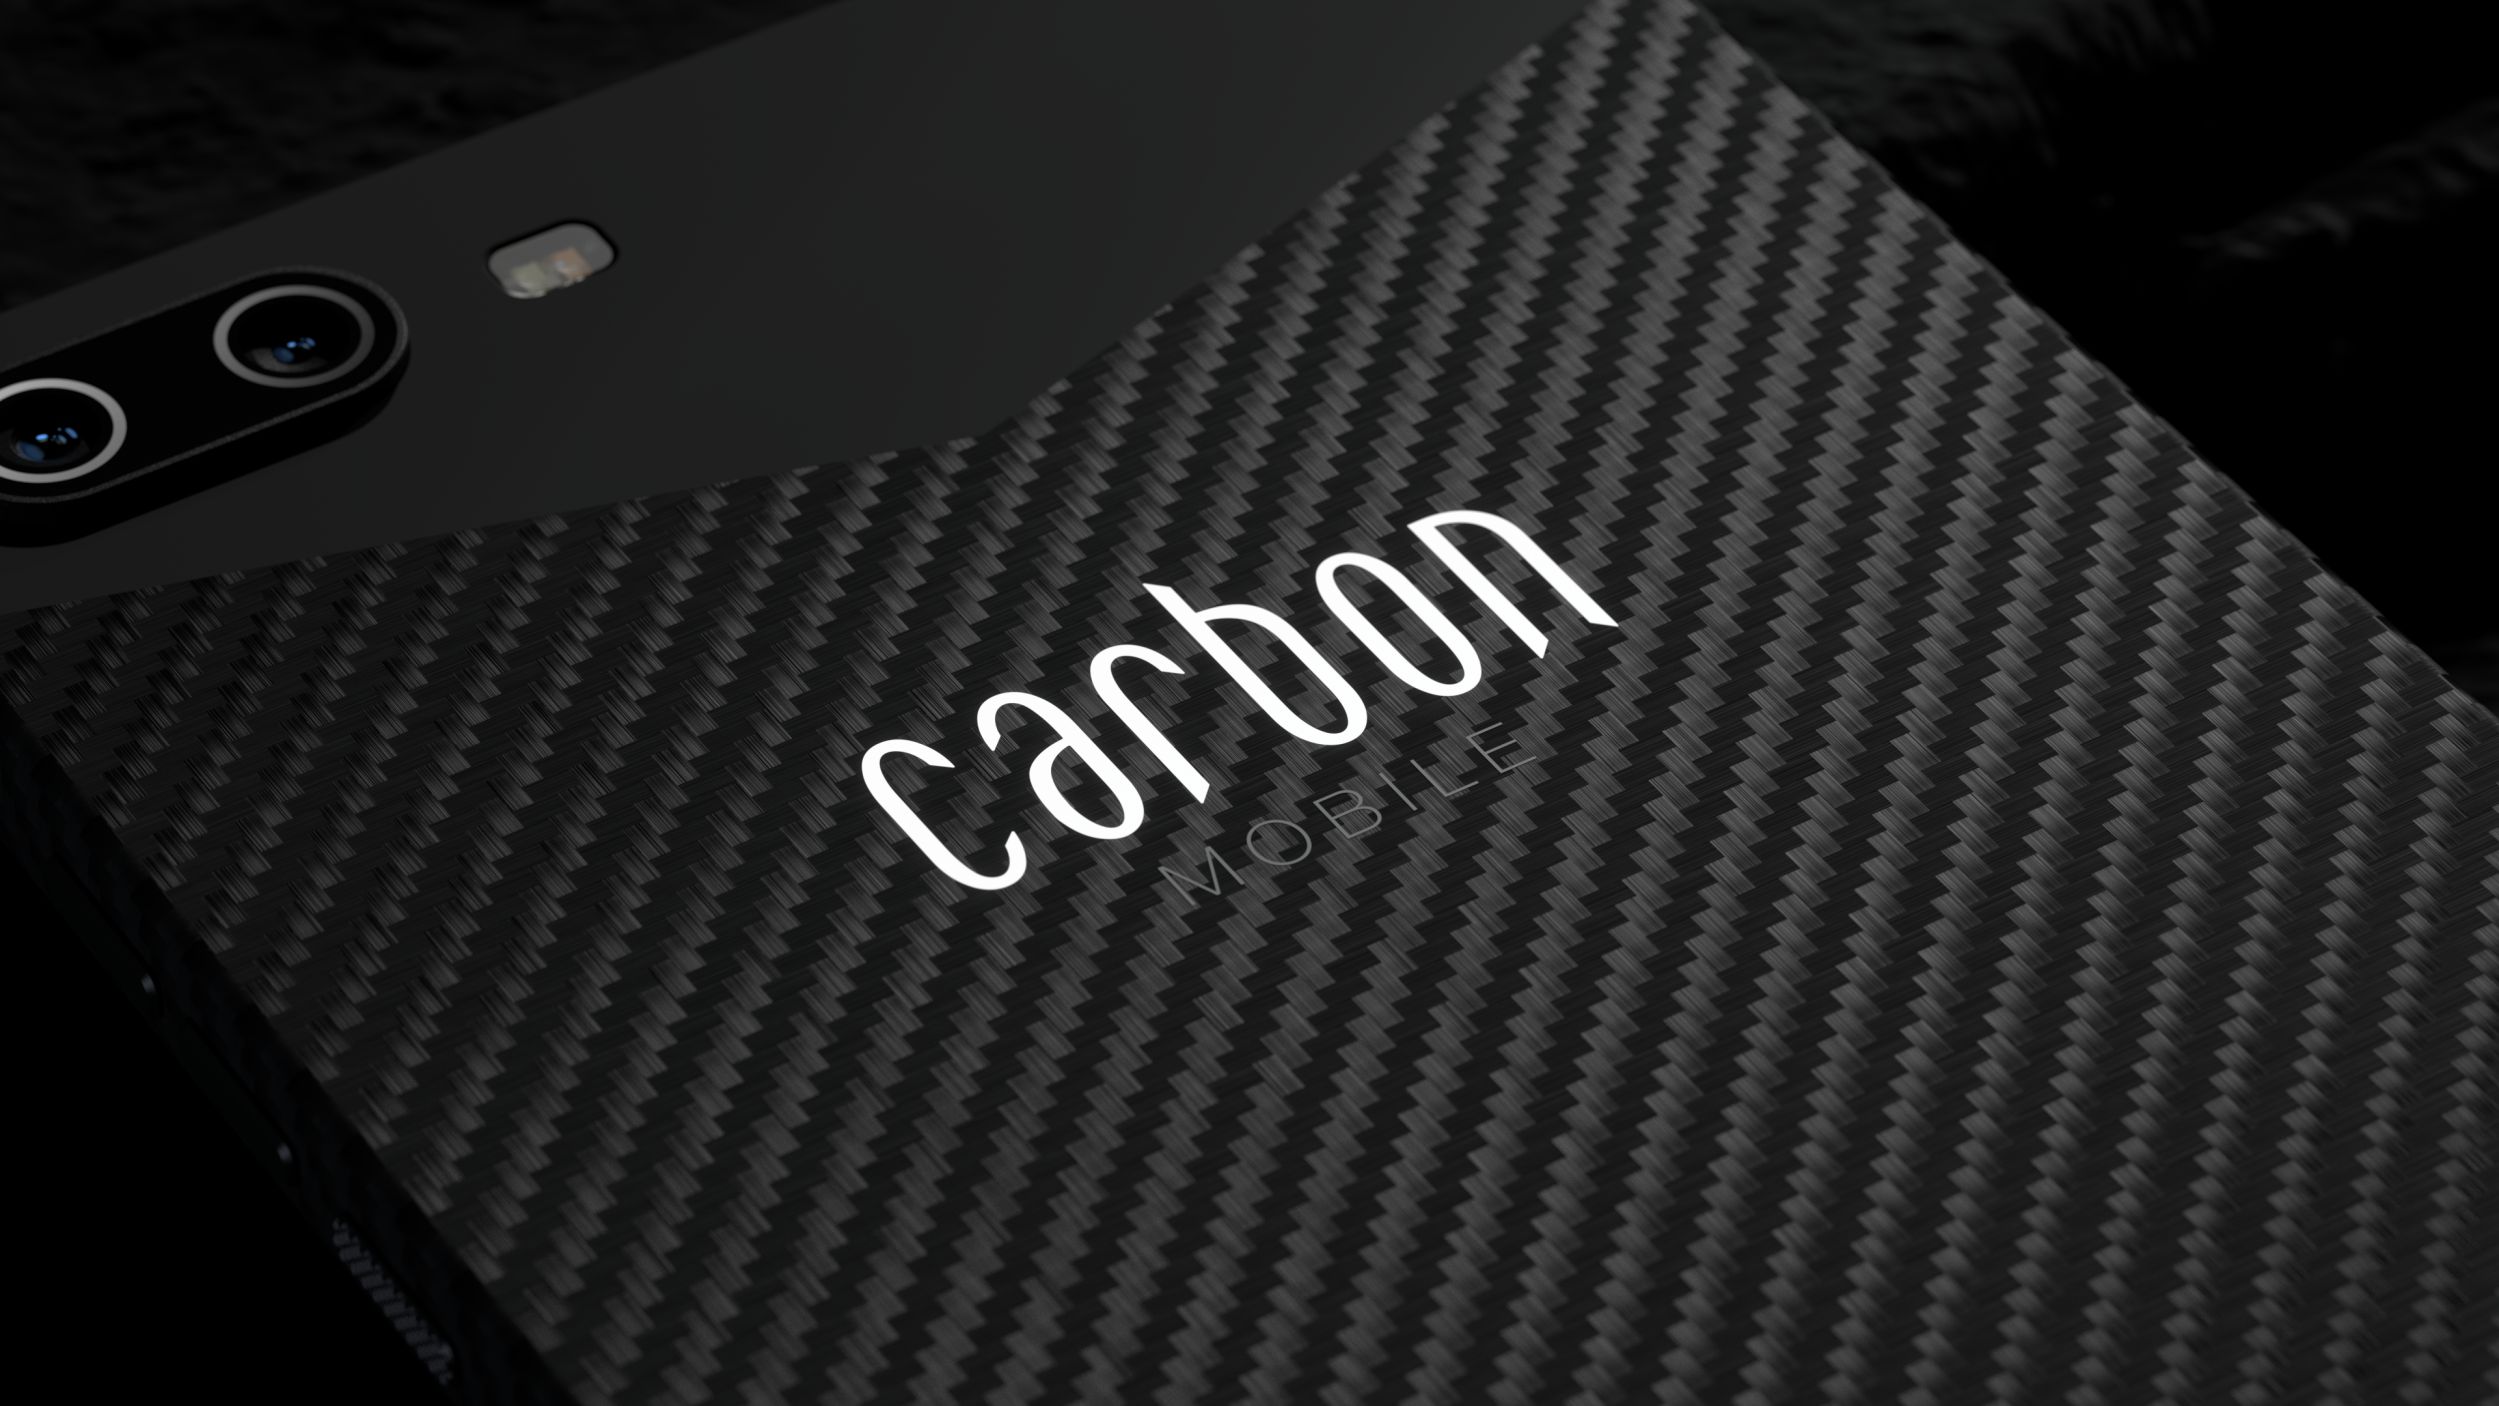 Carbon 1 Mark II launches and promises to be the lightest phone at 125